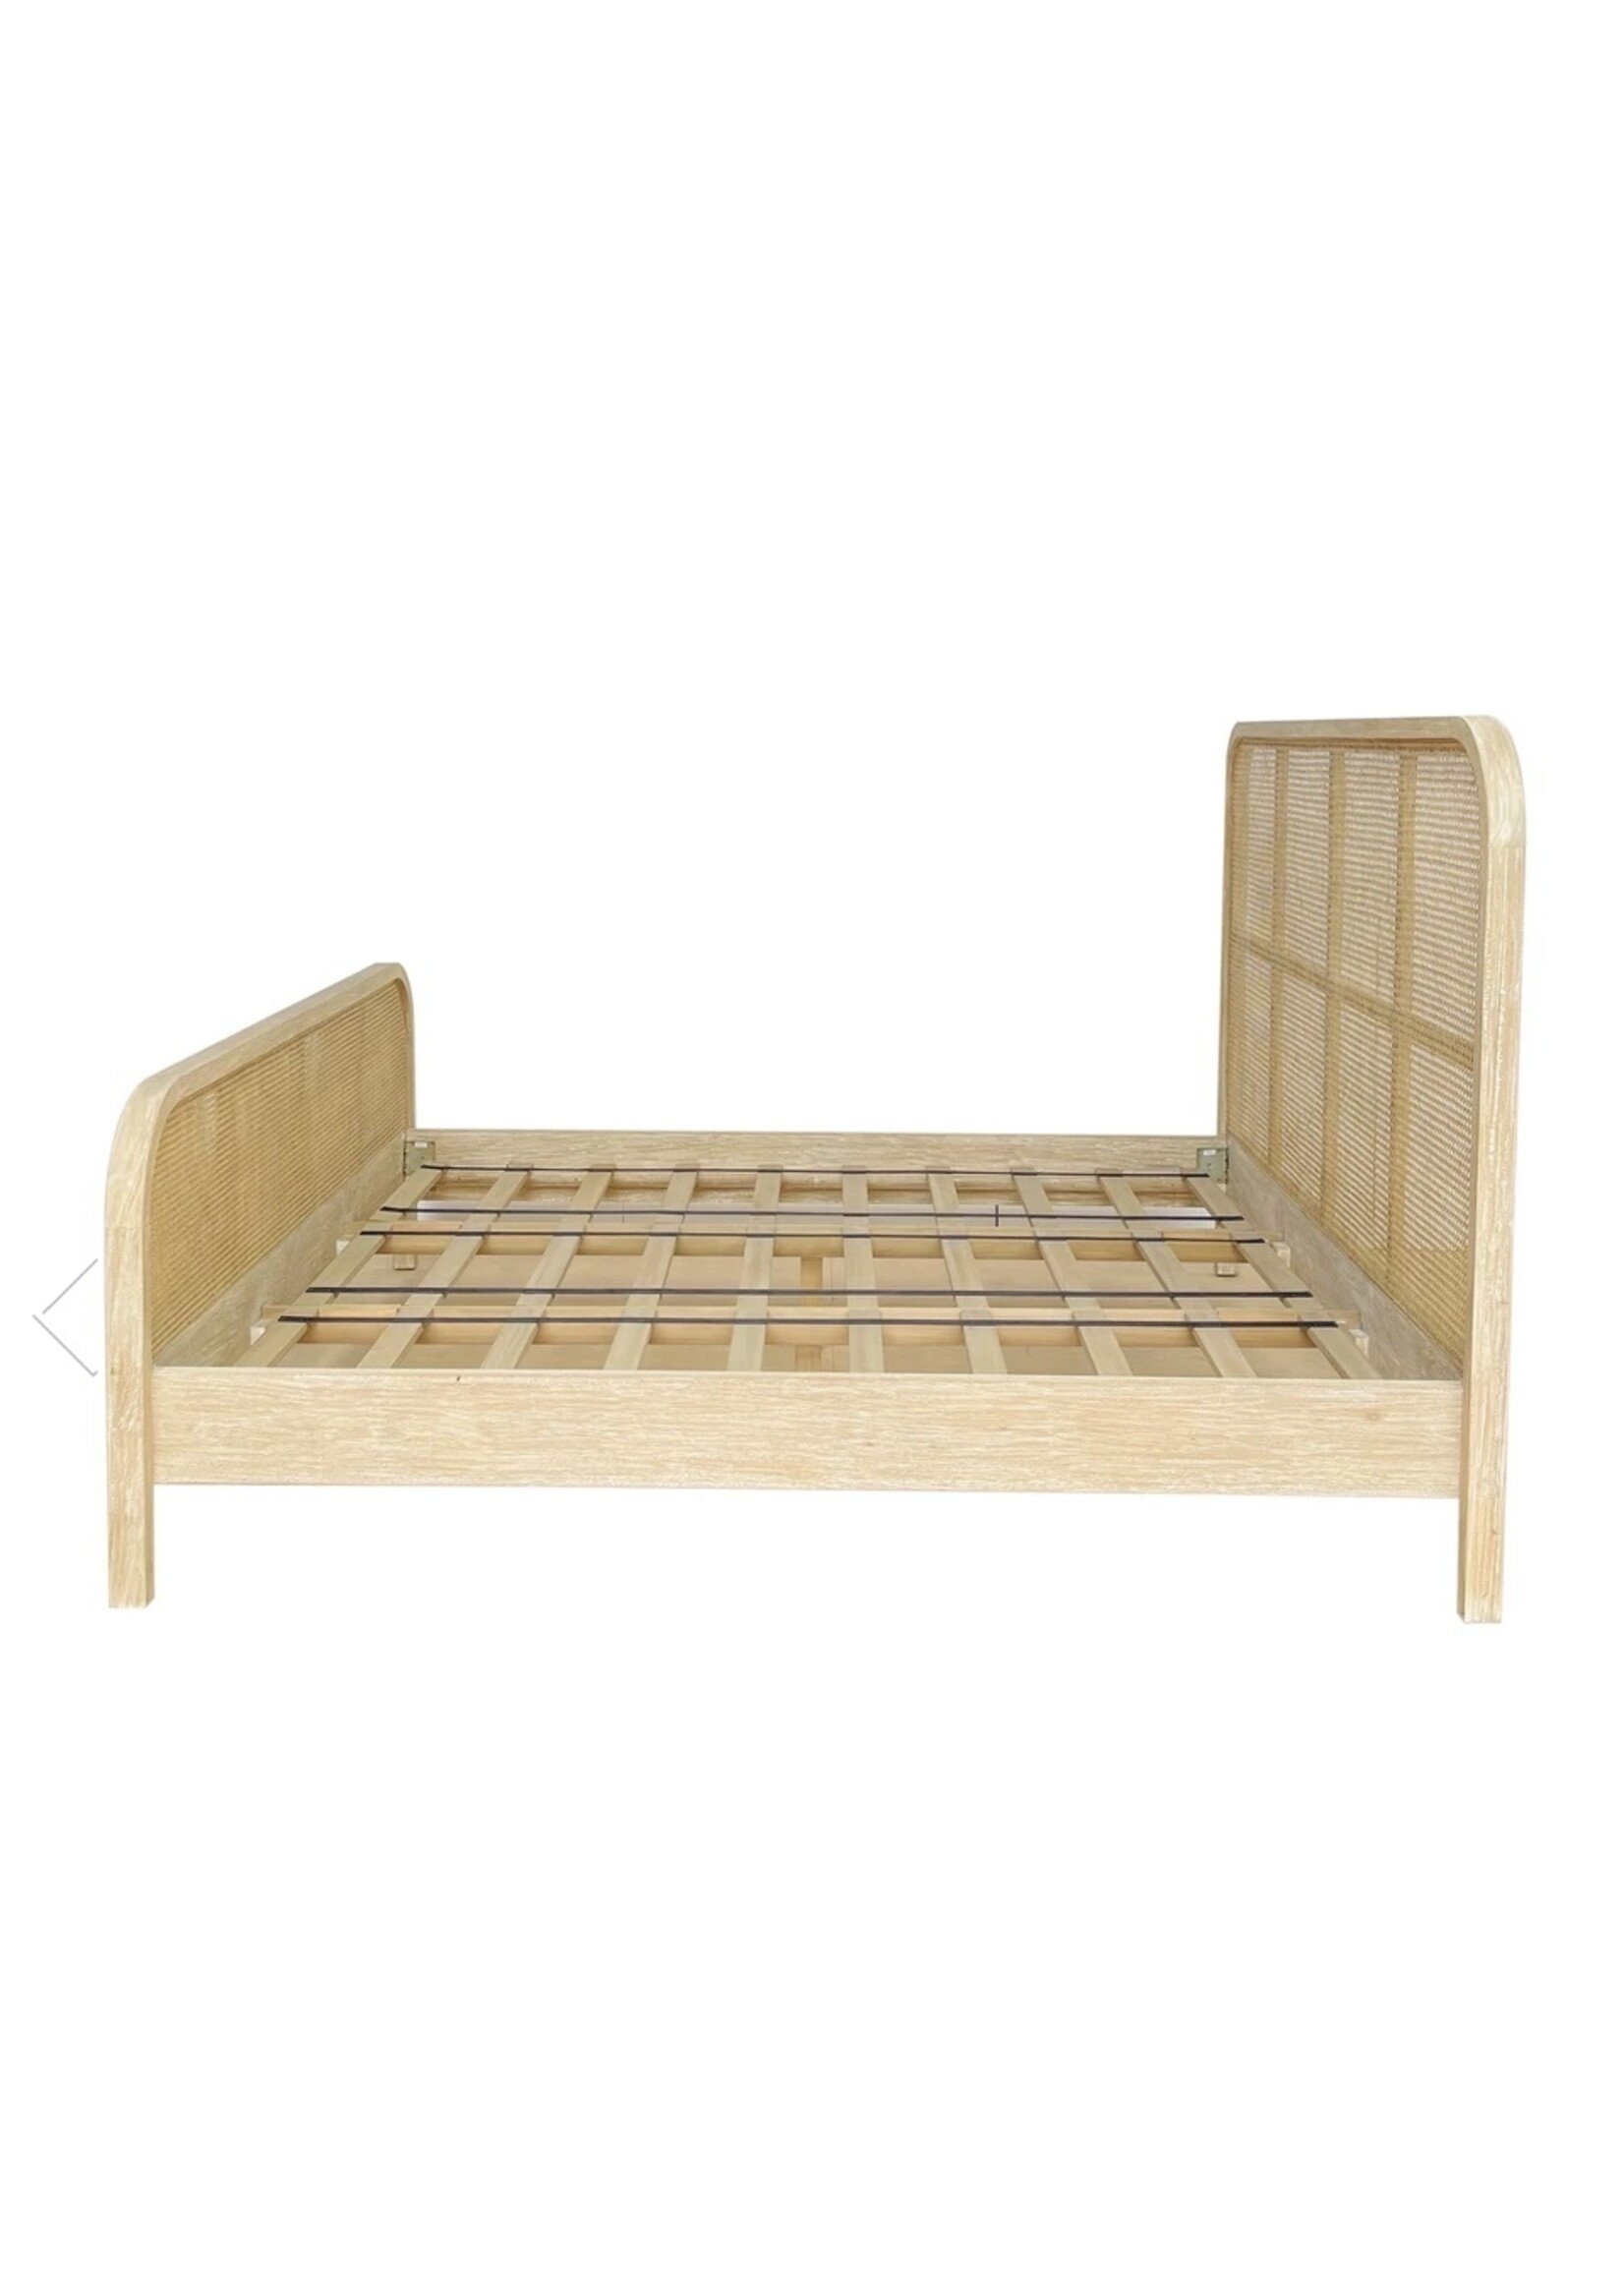 JOELLE QUEEN BED NATURAL 60" W